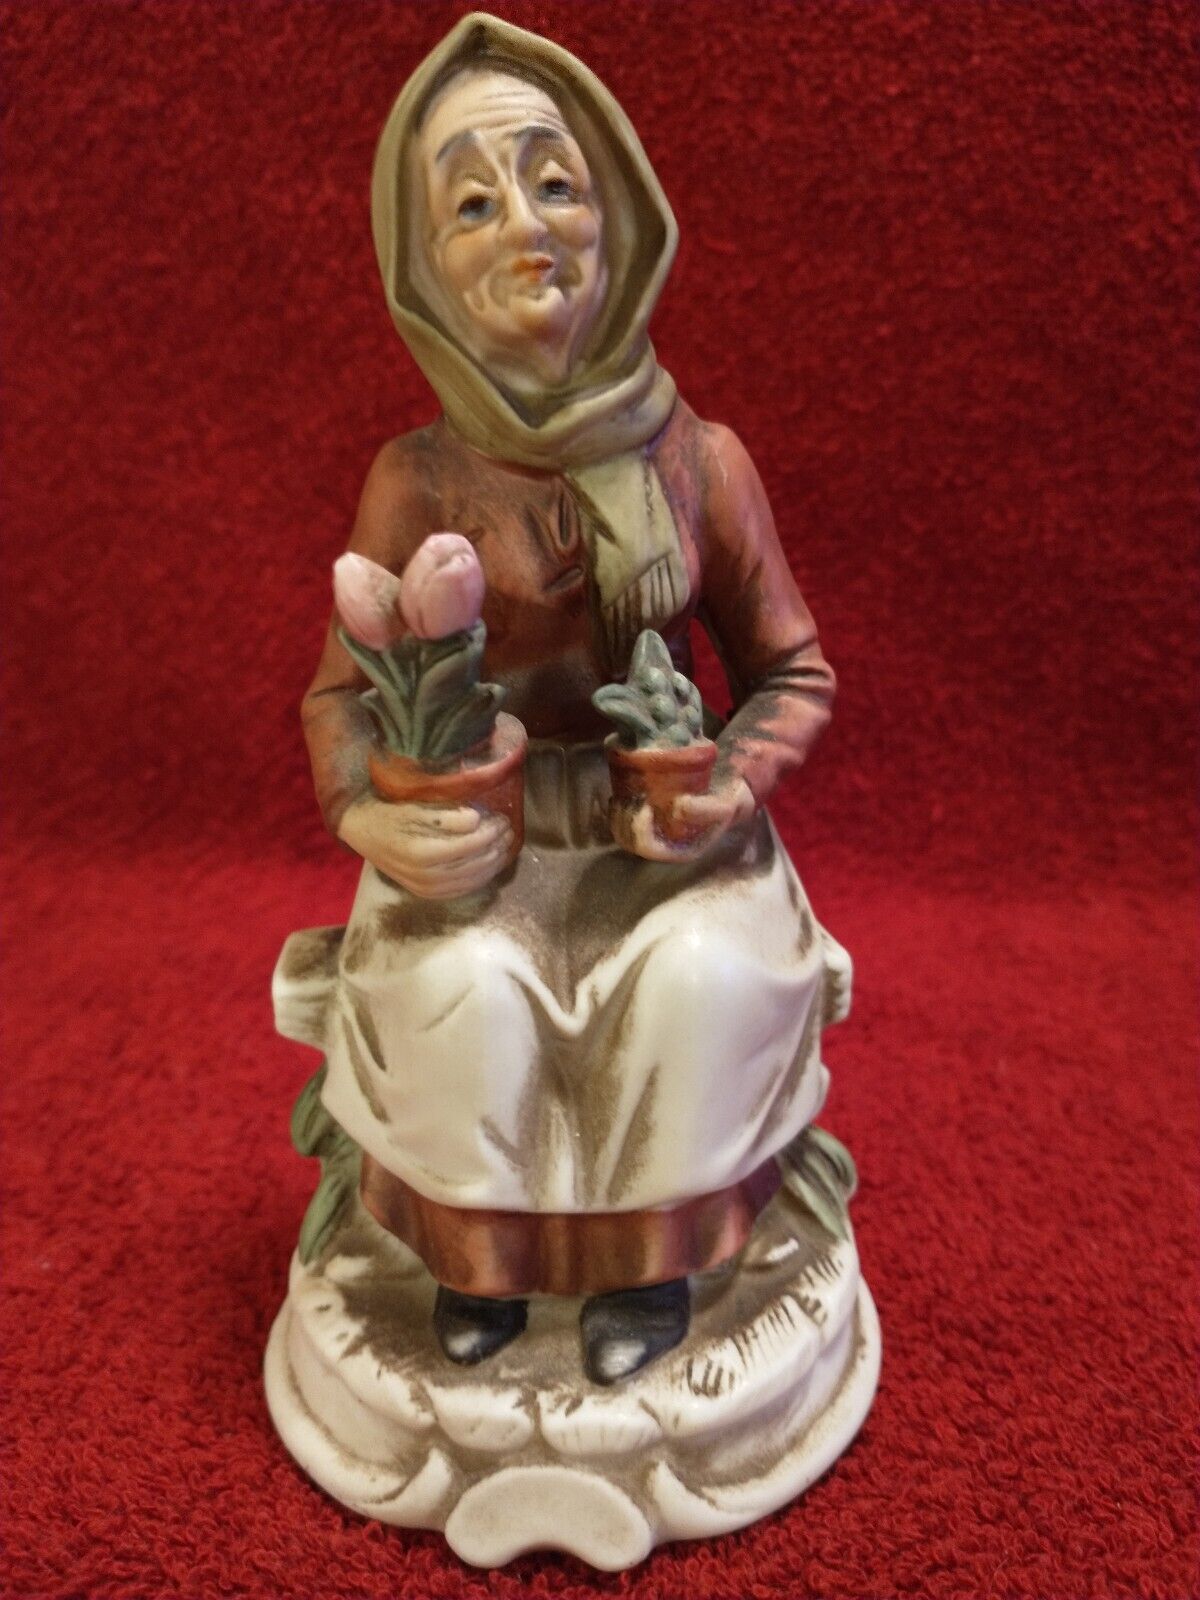 Old Woman Sitting On Bench Holding Plants Porcelain Ceramic